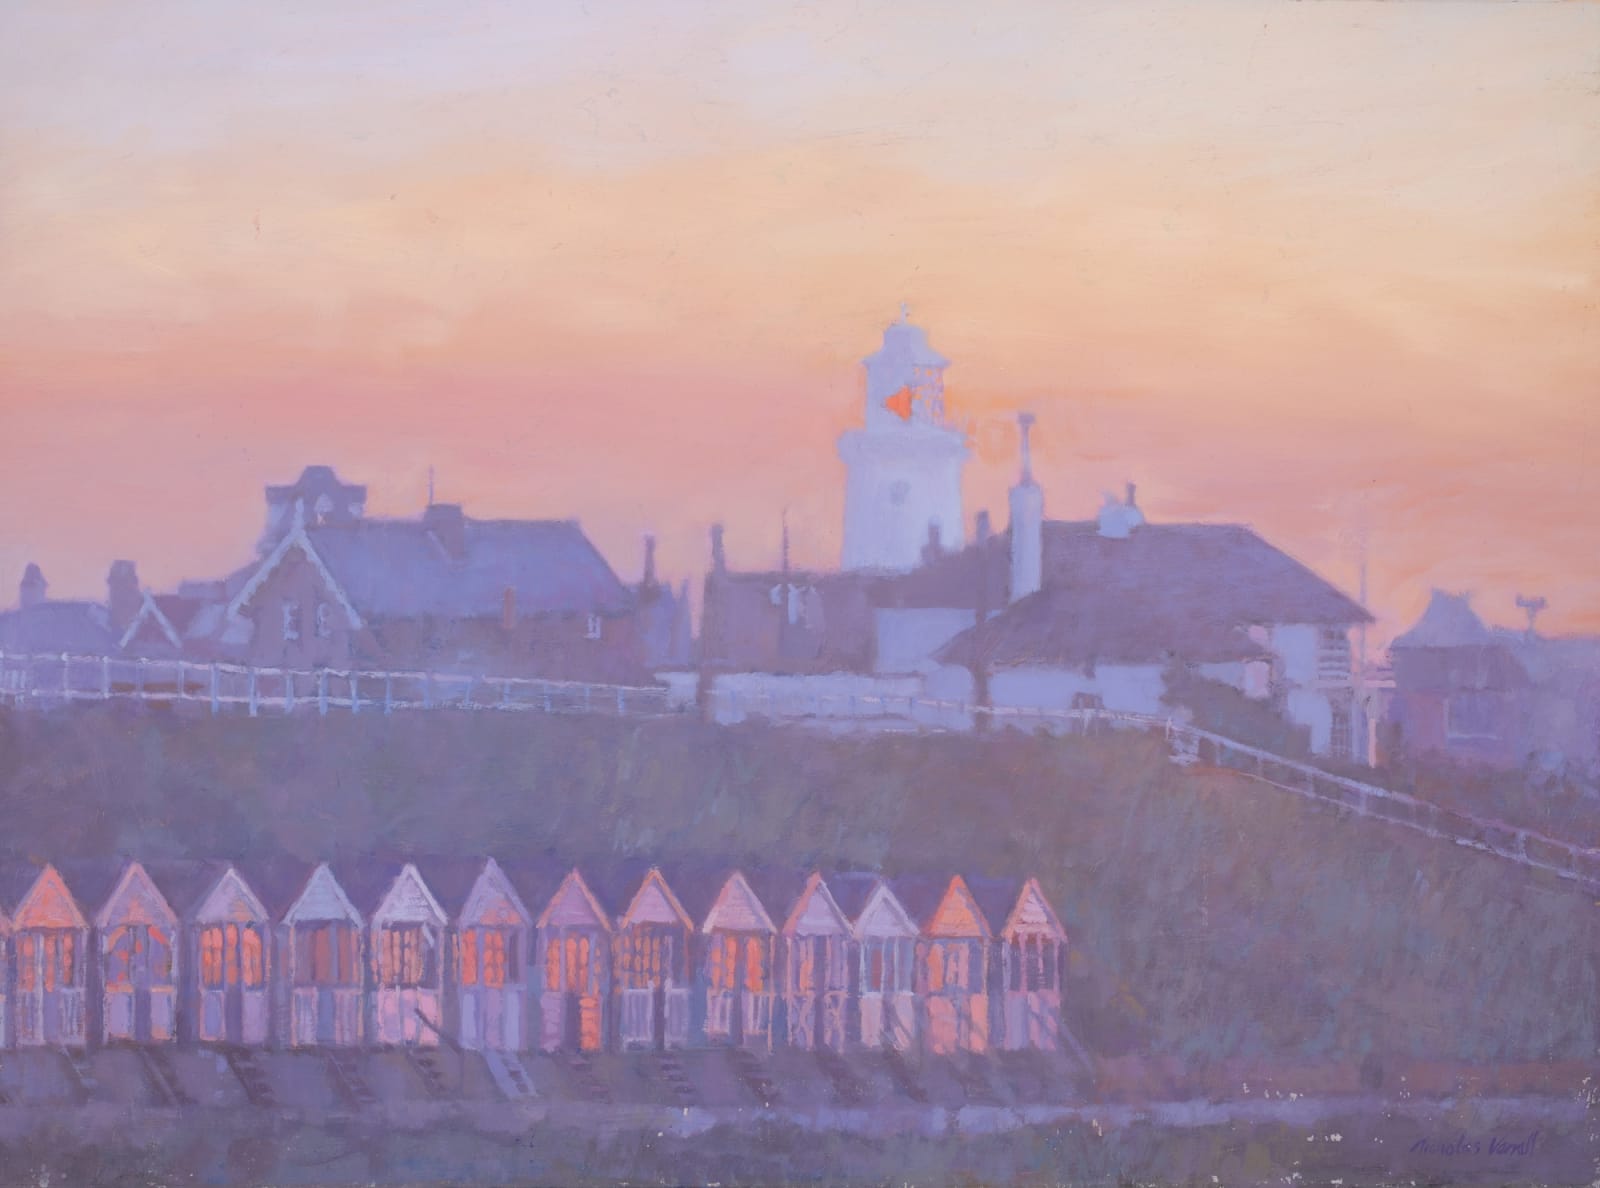 Evening in Southwold - Original Oil Painting by Nicholas Verrall 49cm x 66cm